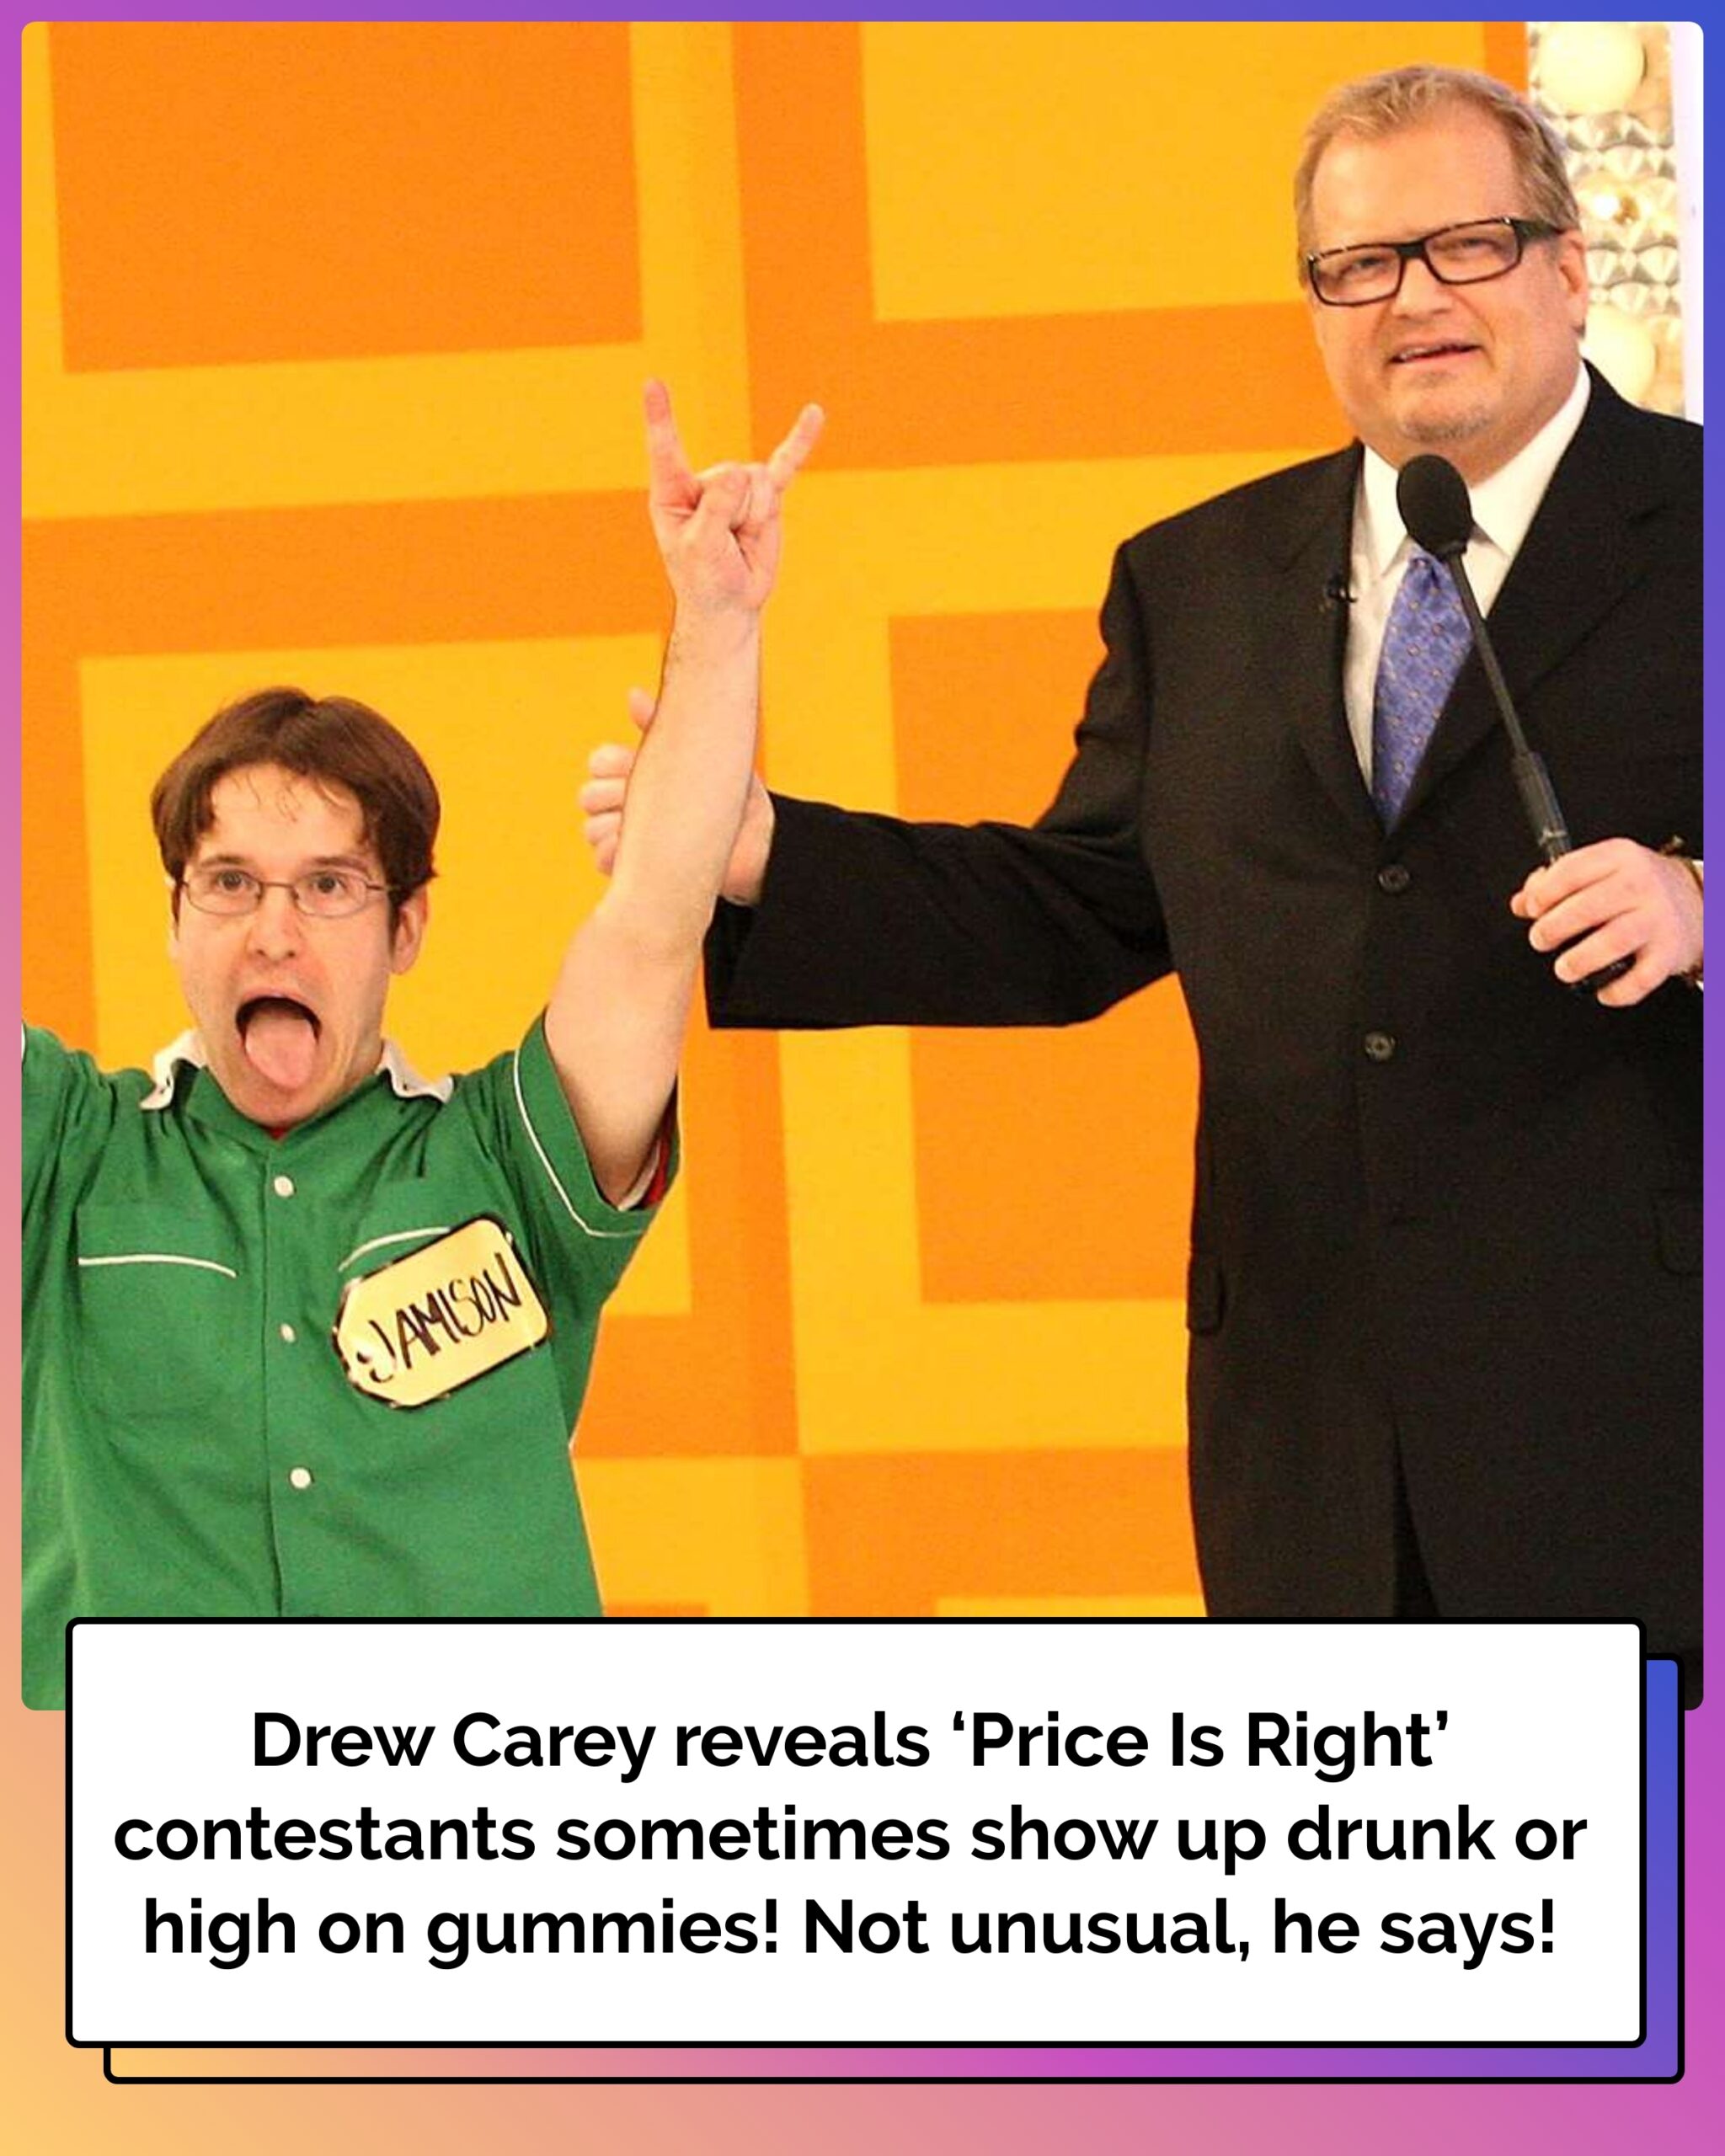 Drew Carey Says It’s ‘Not Unusual’ for ‘Price Is Right’ Contestants to Get Drunk or Be High on Gummies